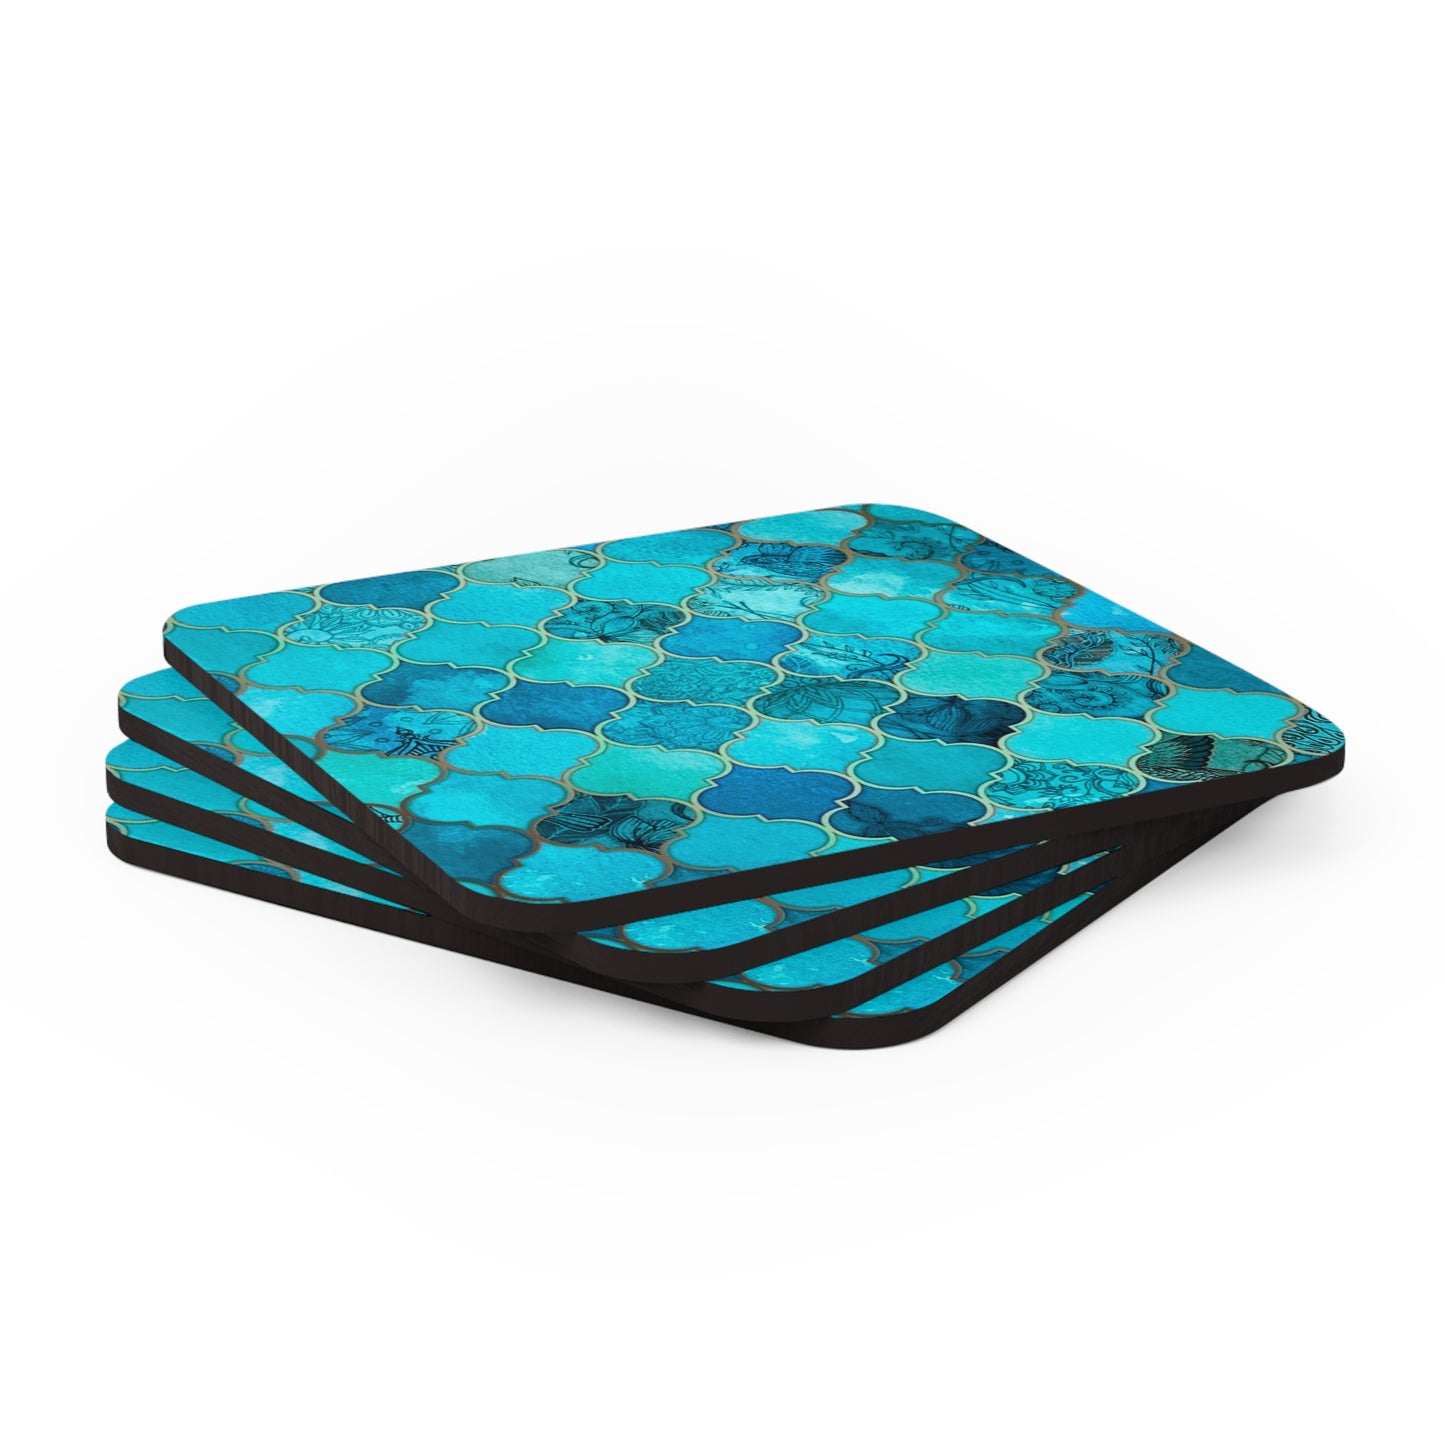 Teal and Turquoise Arabesque Tile Marrakech Moroccan Holiday Christmas Entertaining Corkwood Coaster Set